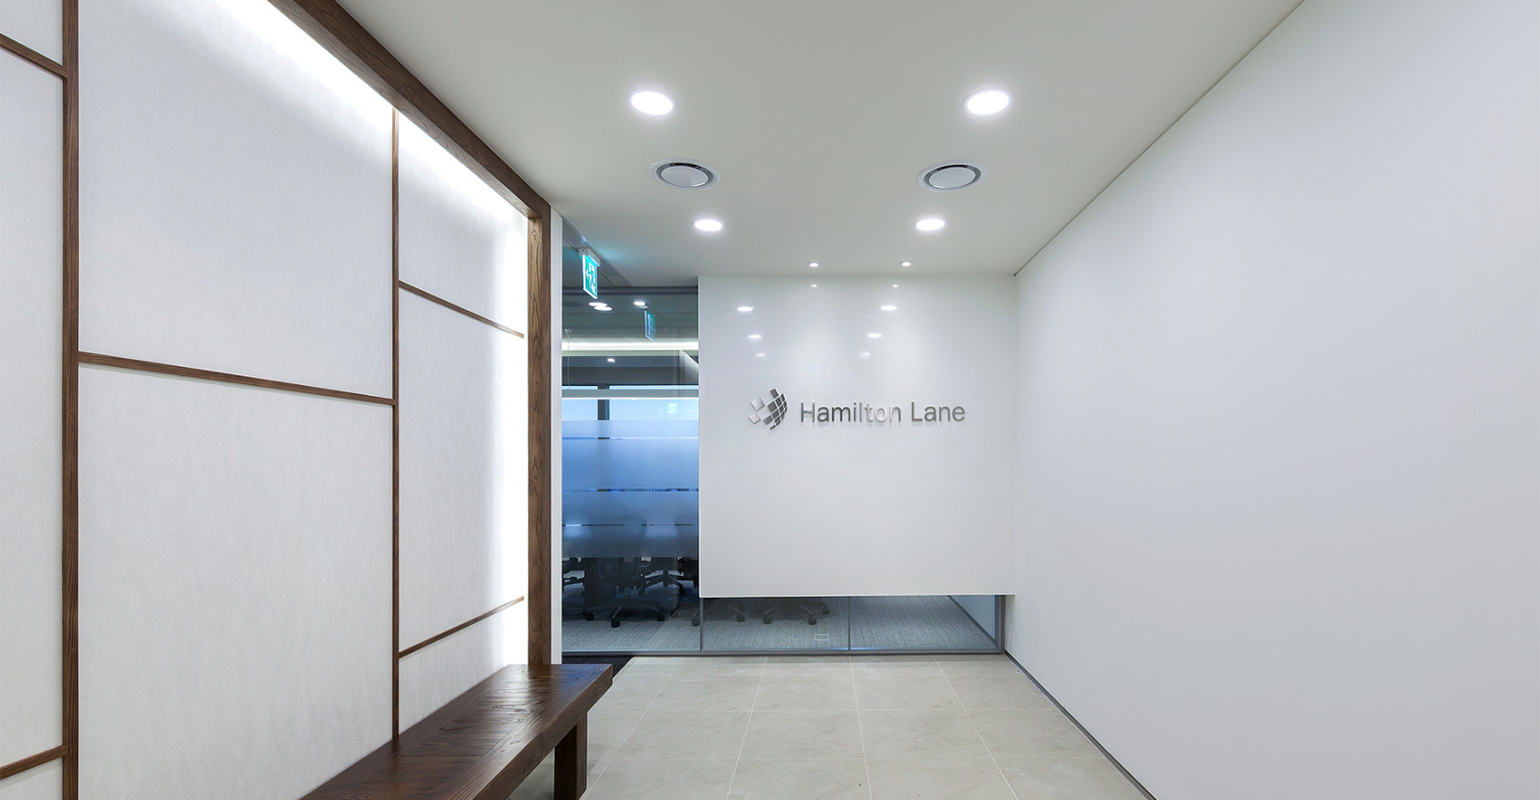 Hamilton Lane Targets Wealthy Investors With New Fund, Rare Deal